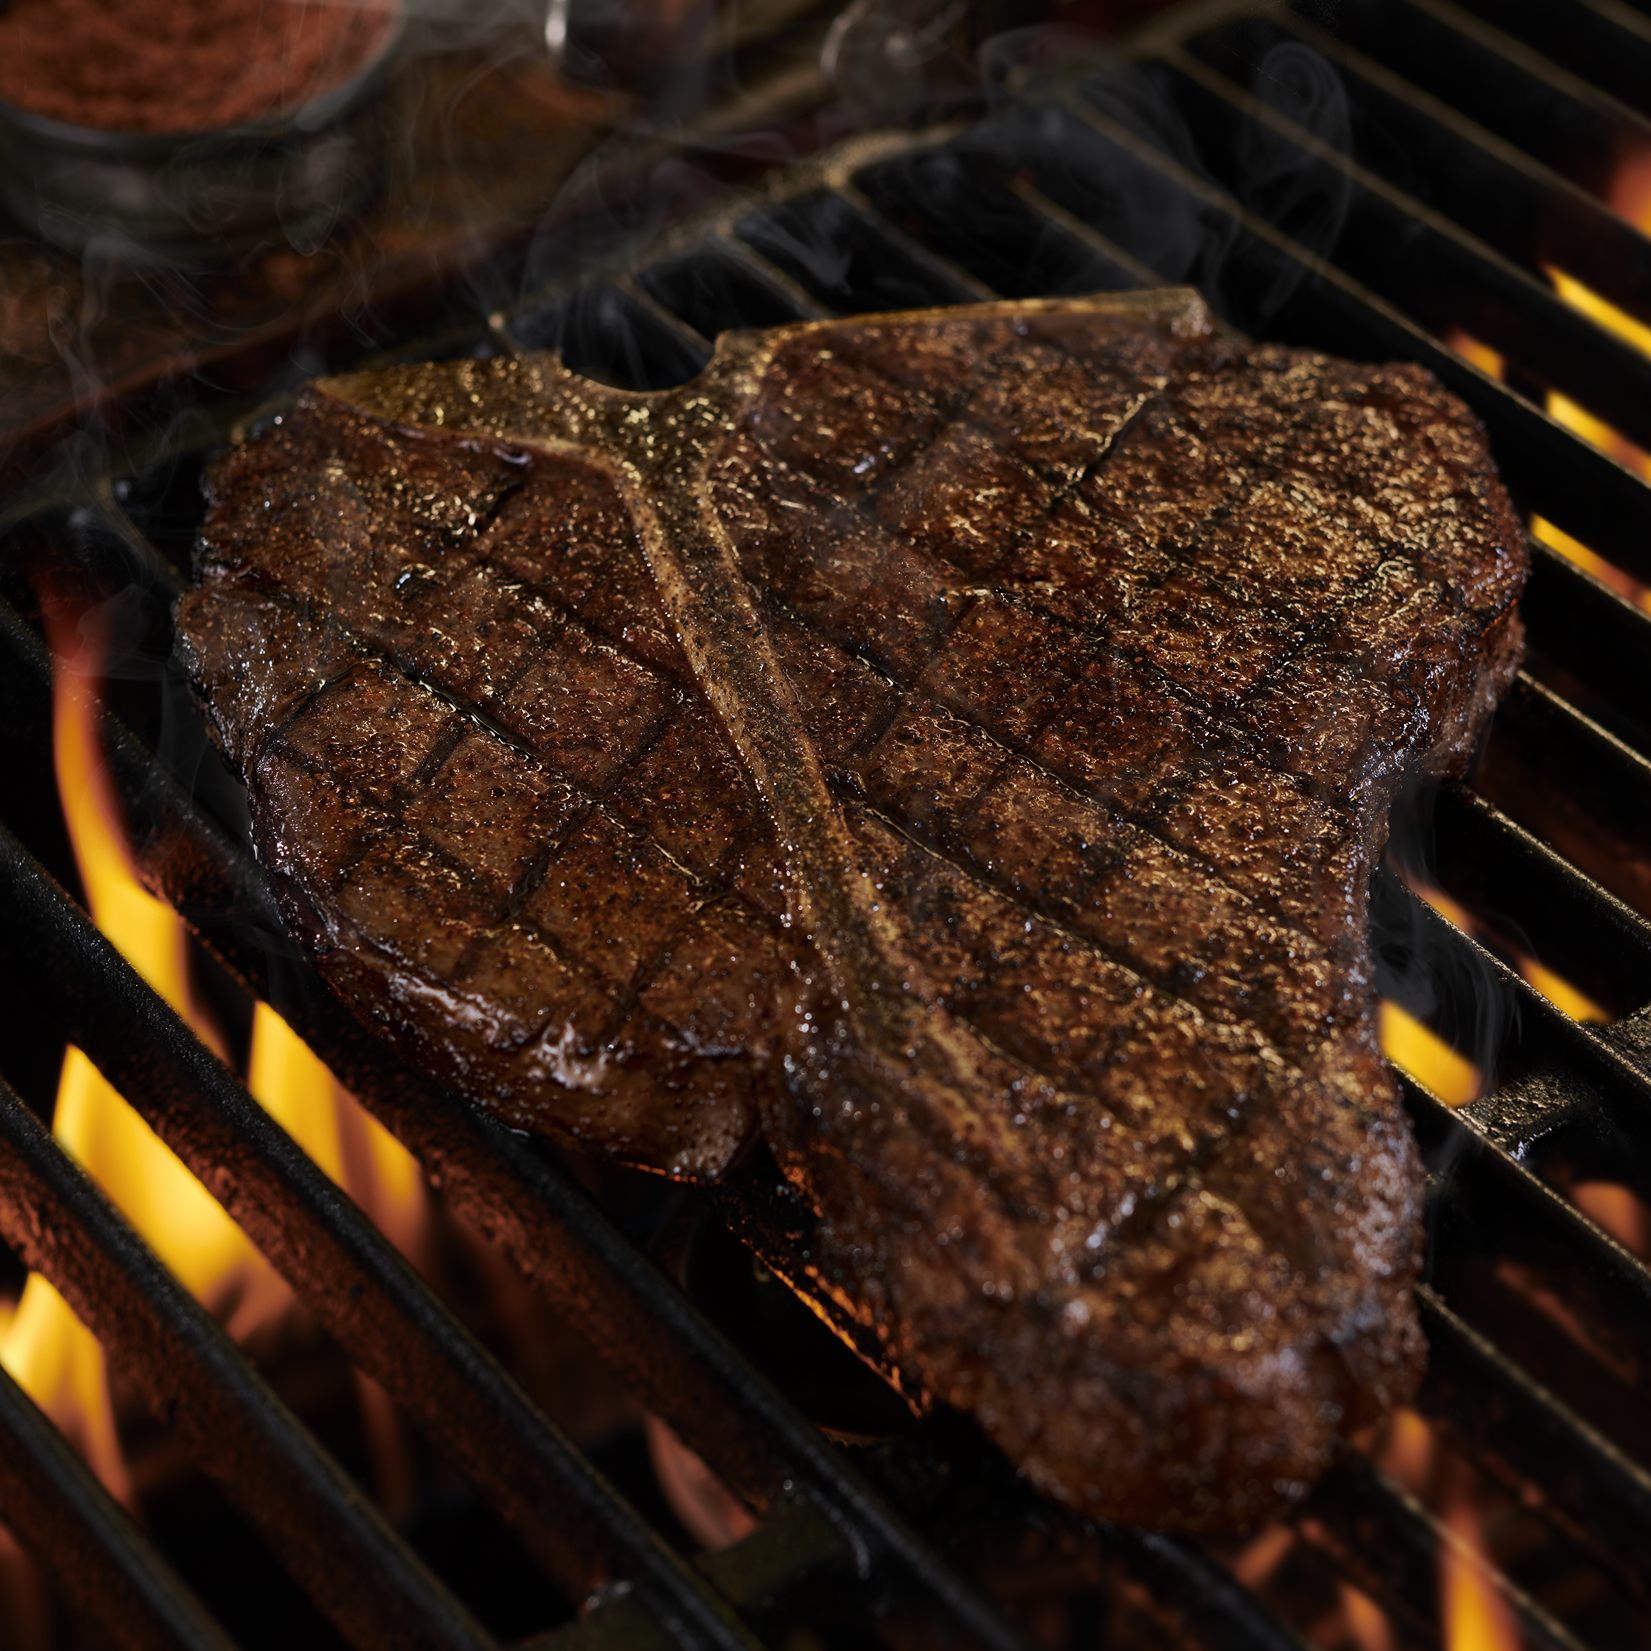 Got the biggest steak in the game wearing our name! The LongHorn porterhouse combines a bone-in stri LongHorn Steakhouse Brownsville (956)983-3115